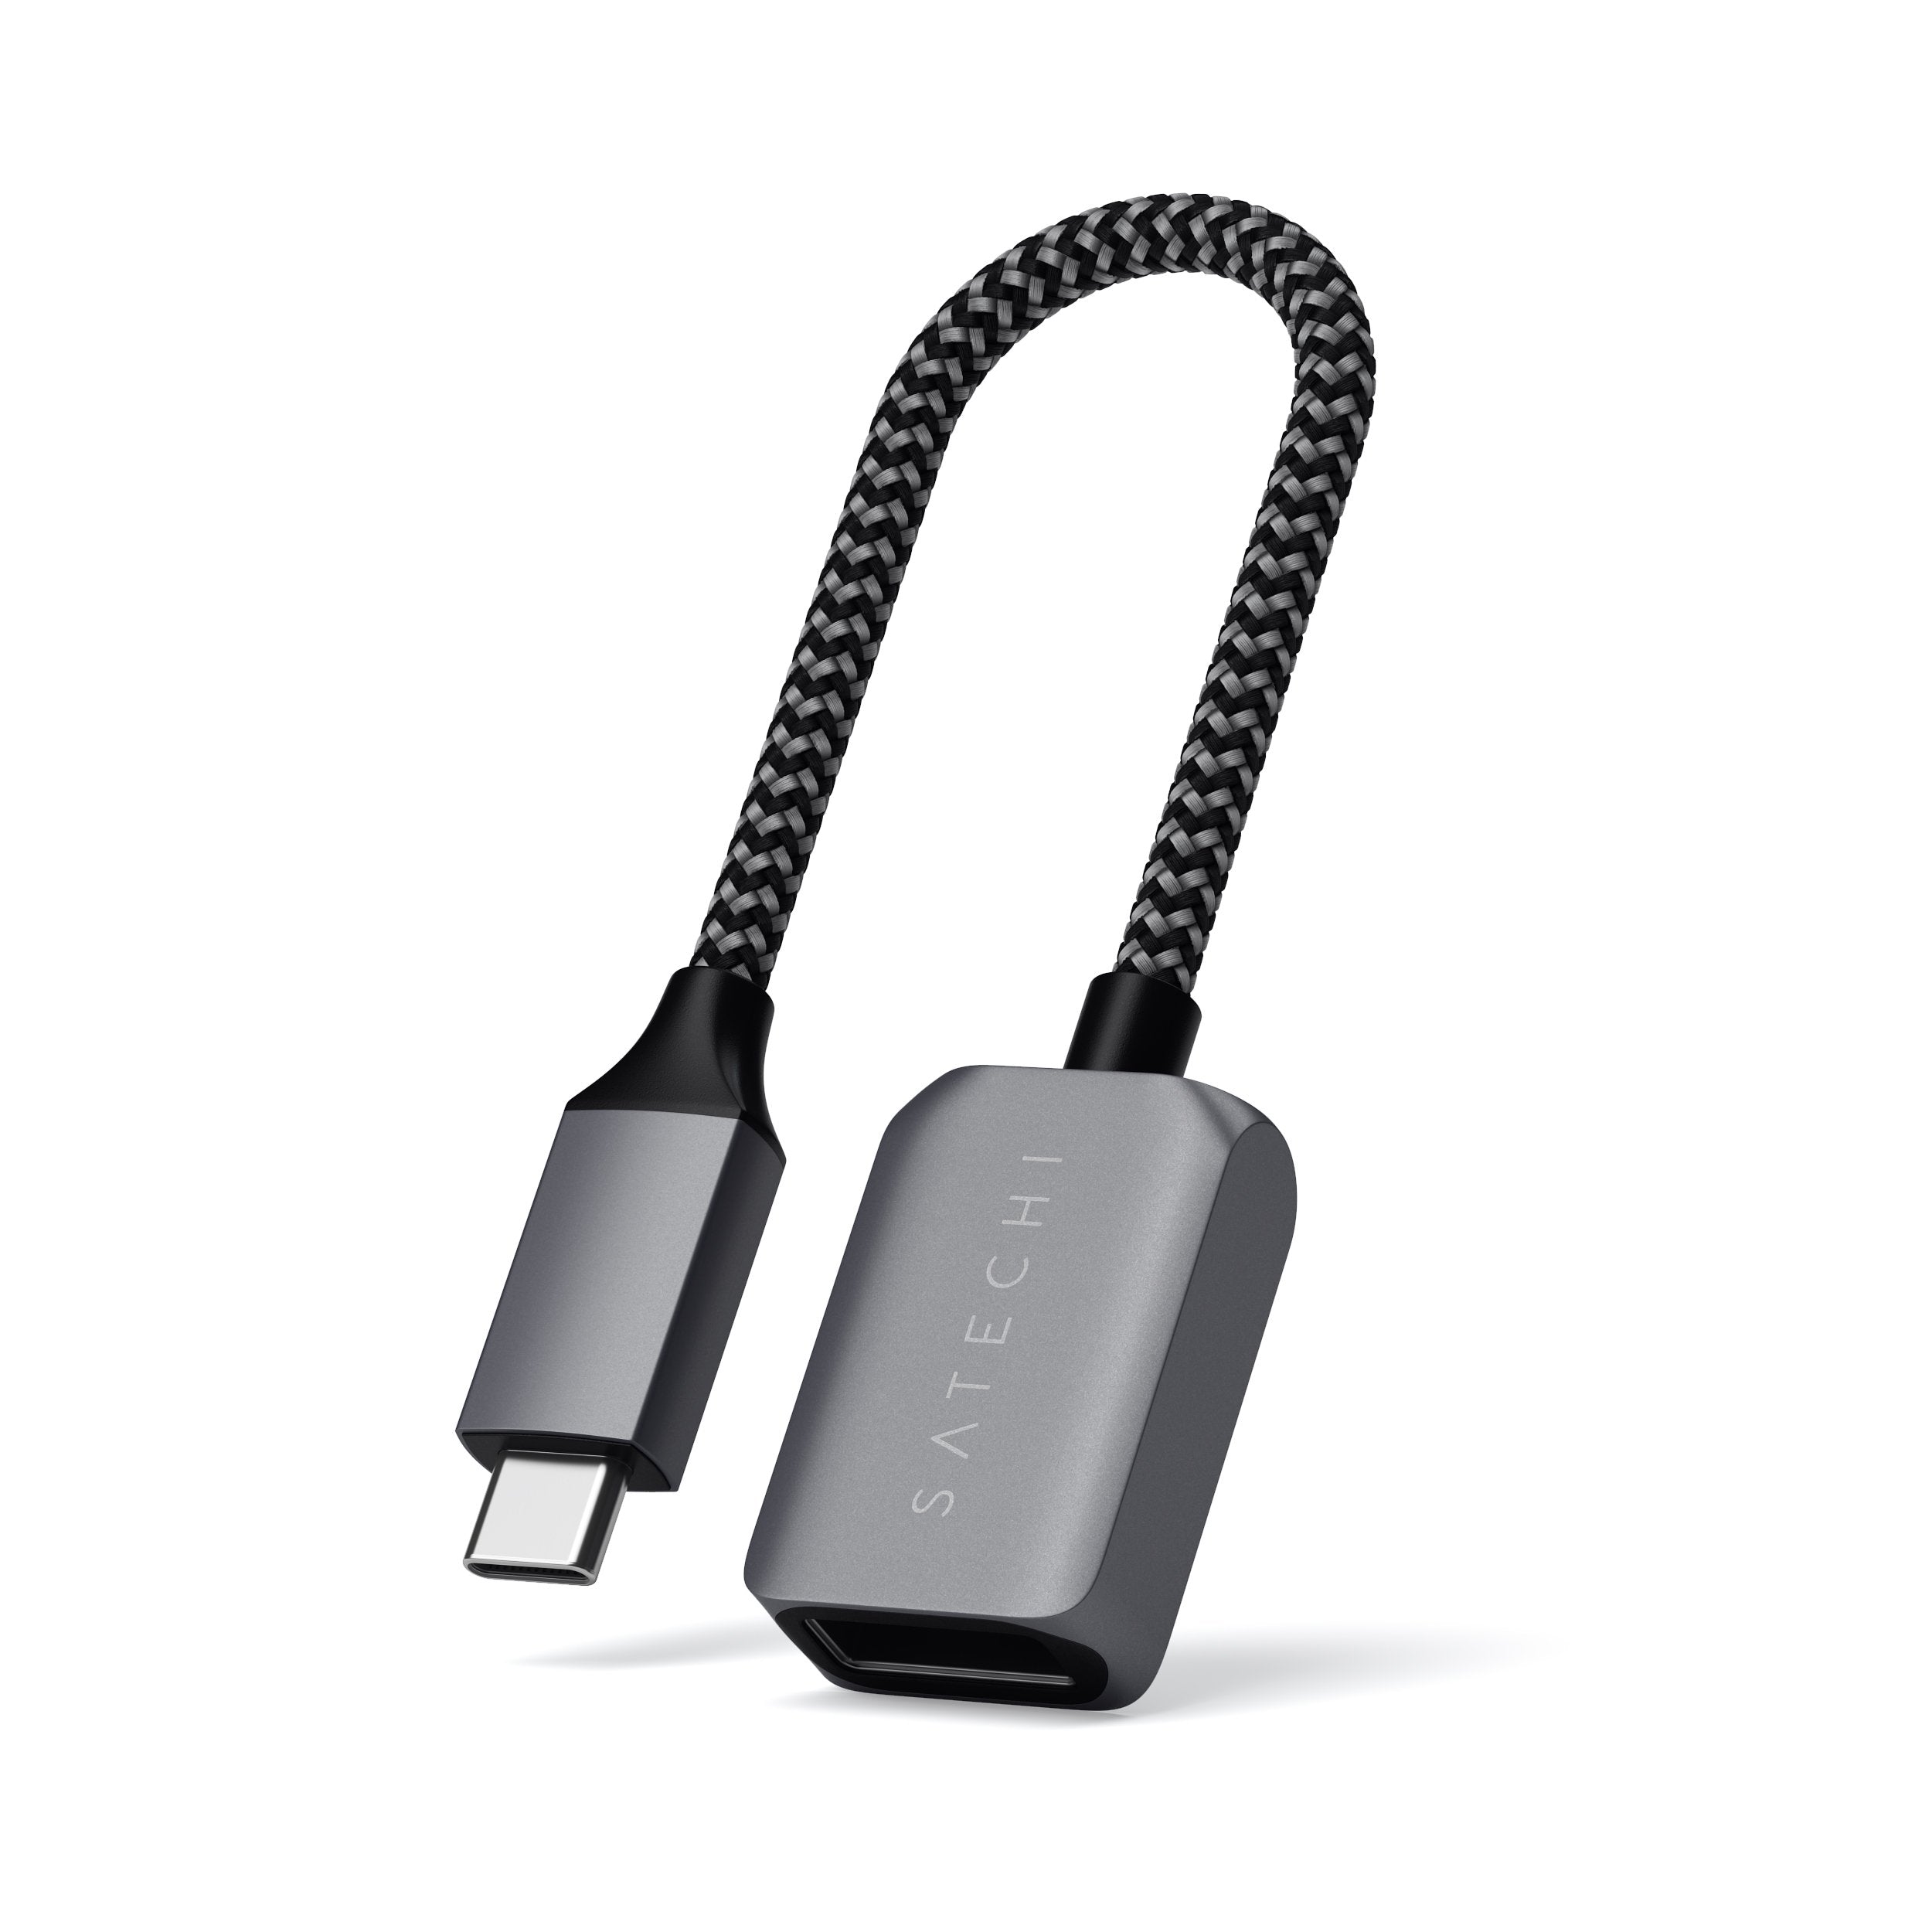 USB-C to USB 3.0 Adapter Cable USB-C Satechi 